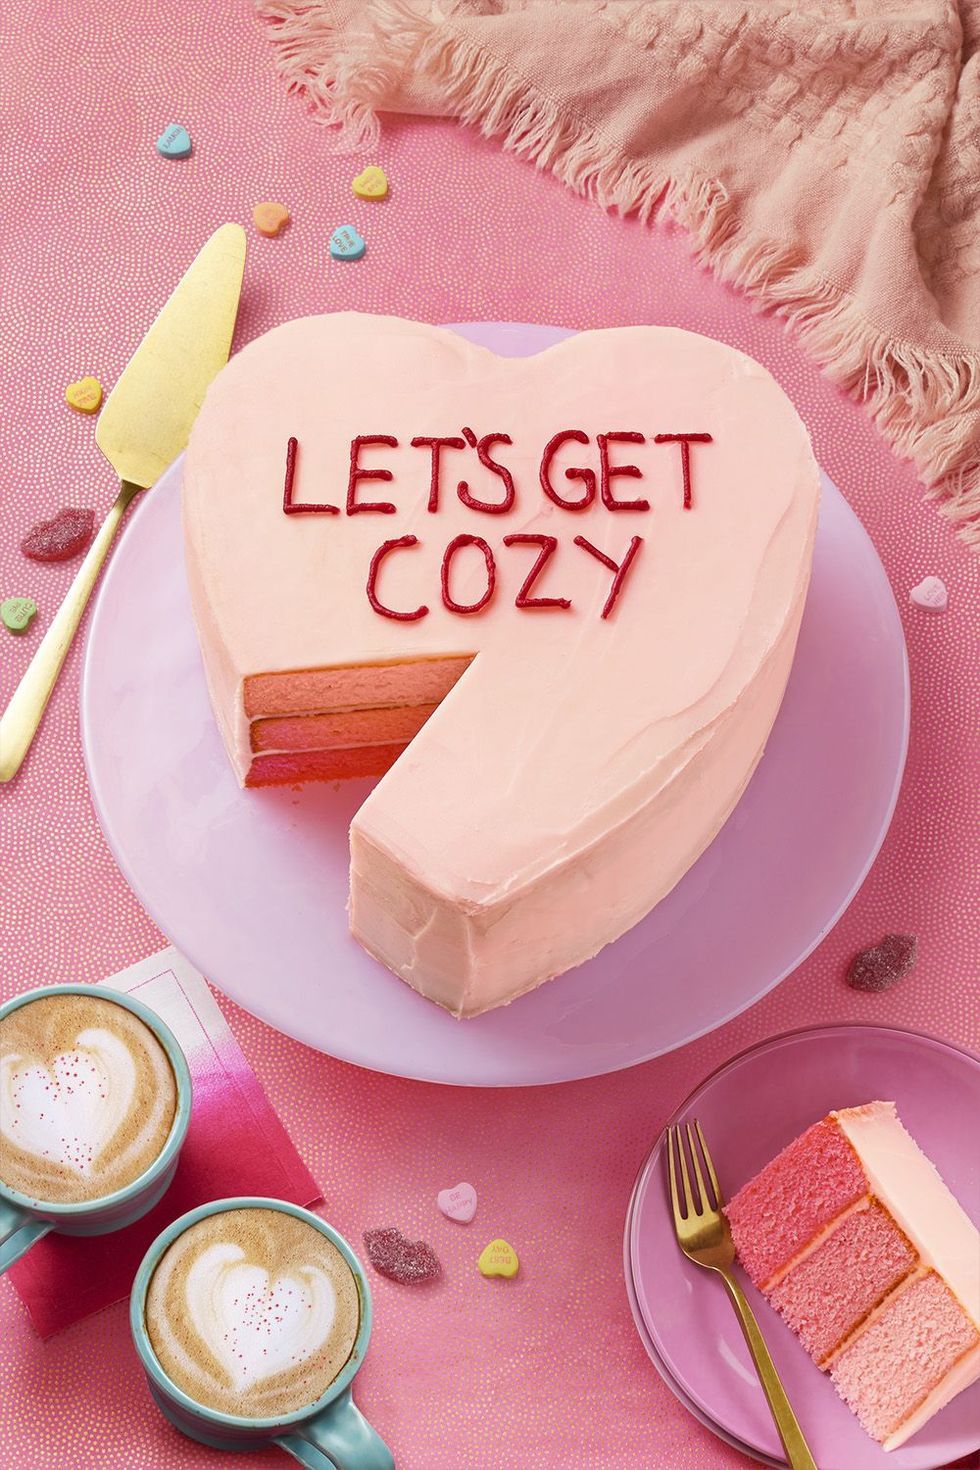 Get a Cozy Cake for Valentine's Day